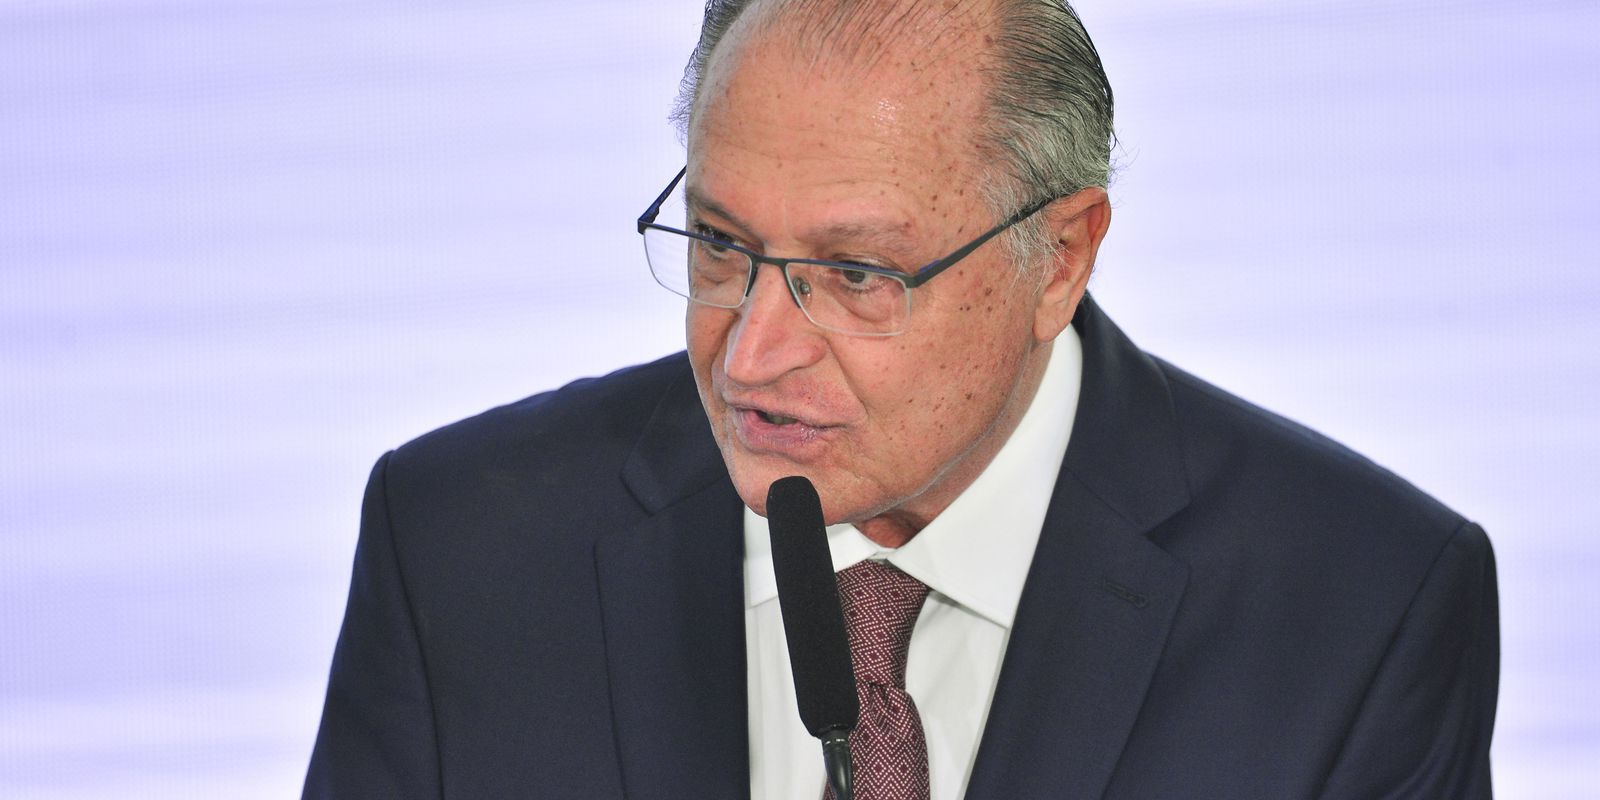 Alckmin says new fiscal anchor will be presented in coming days